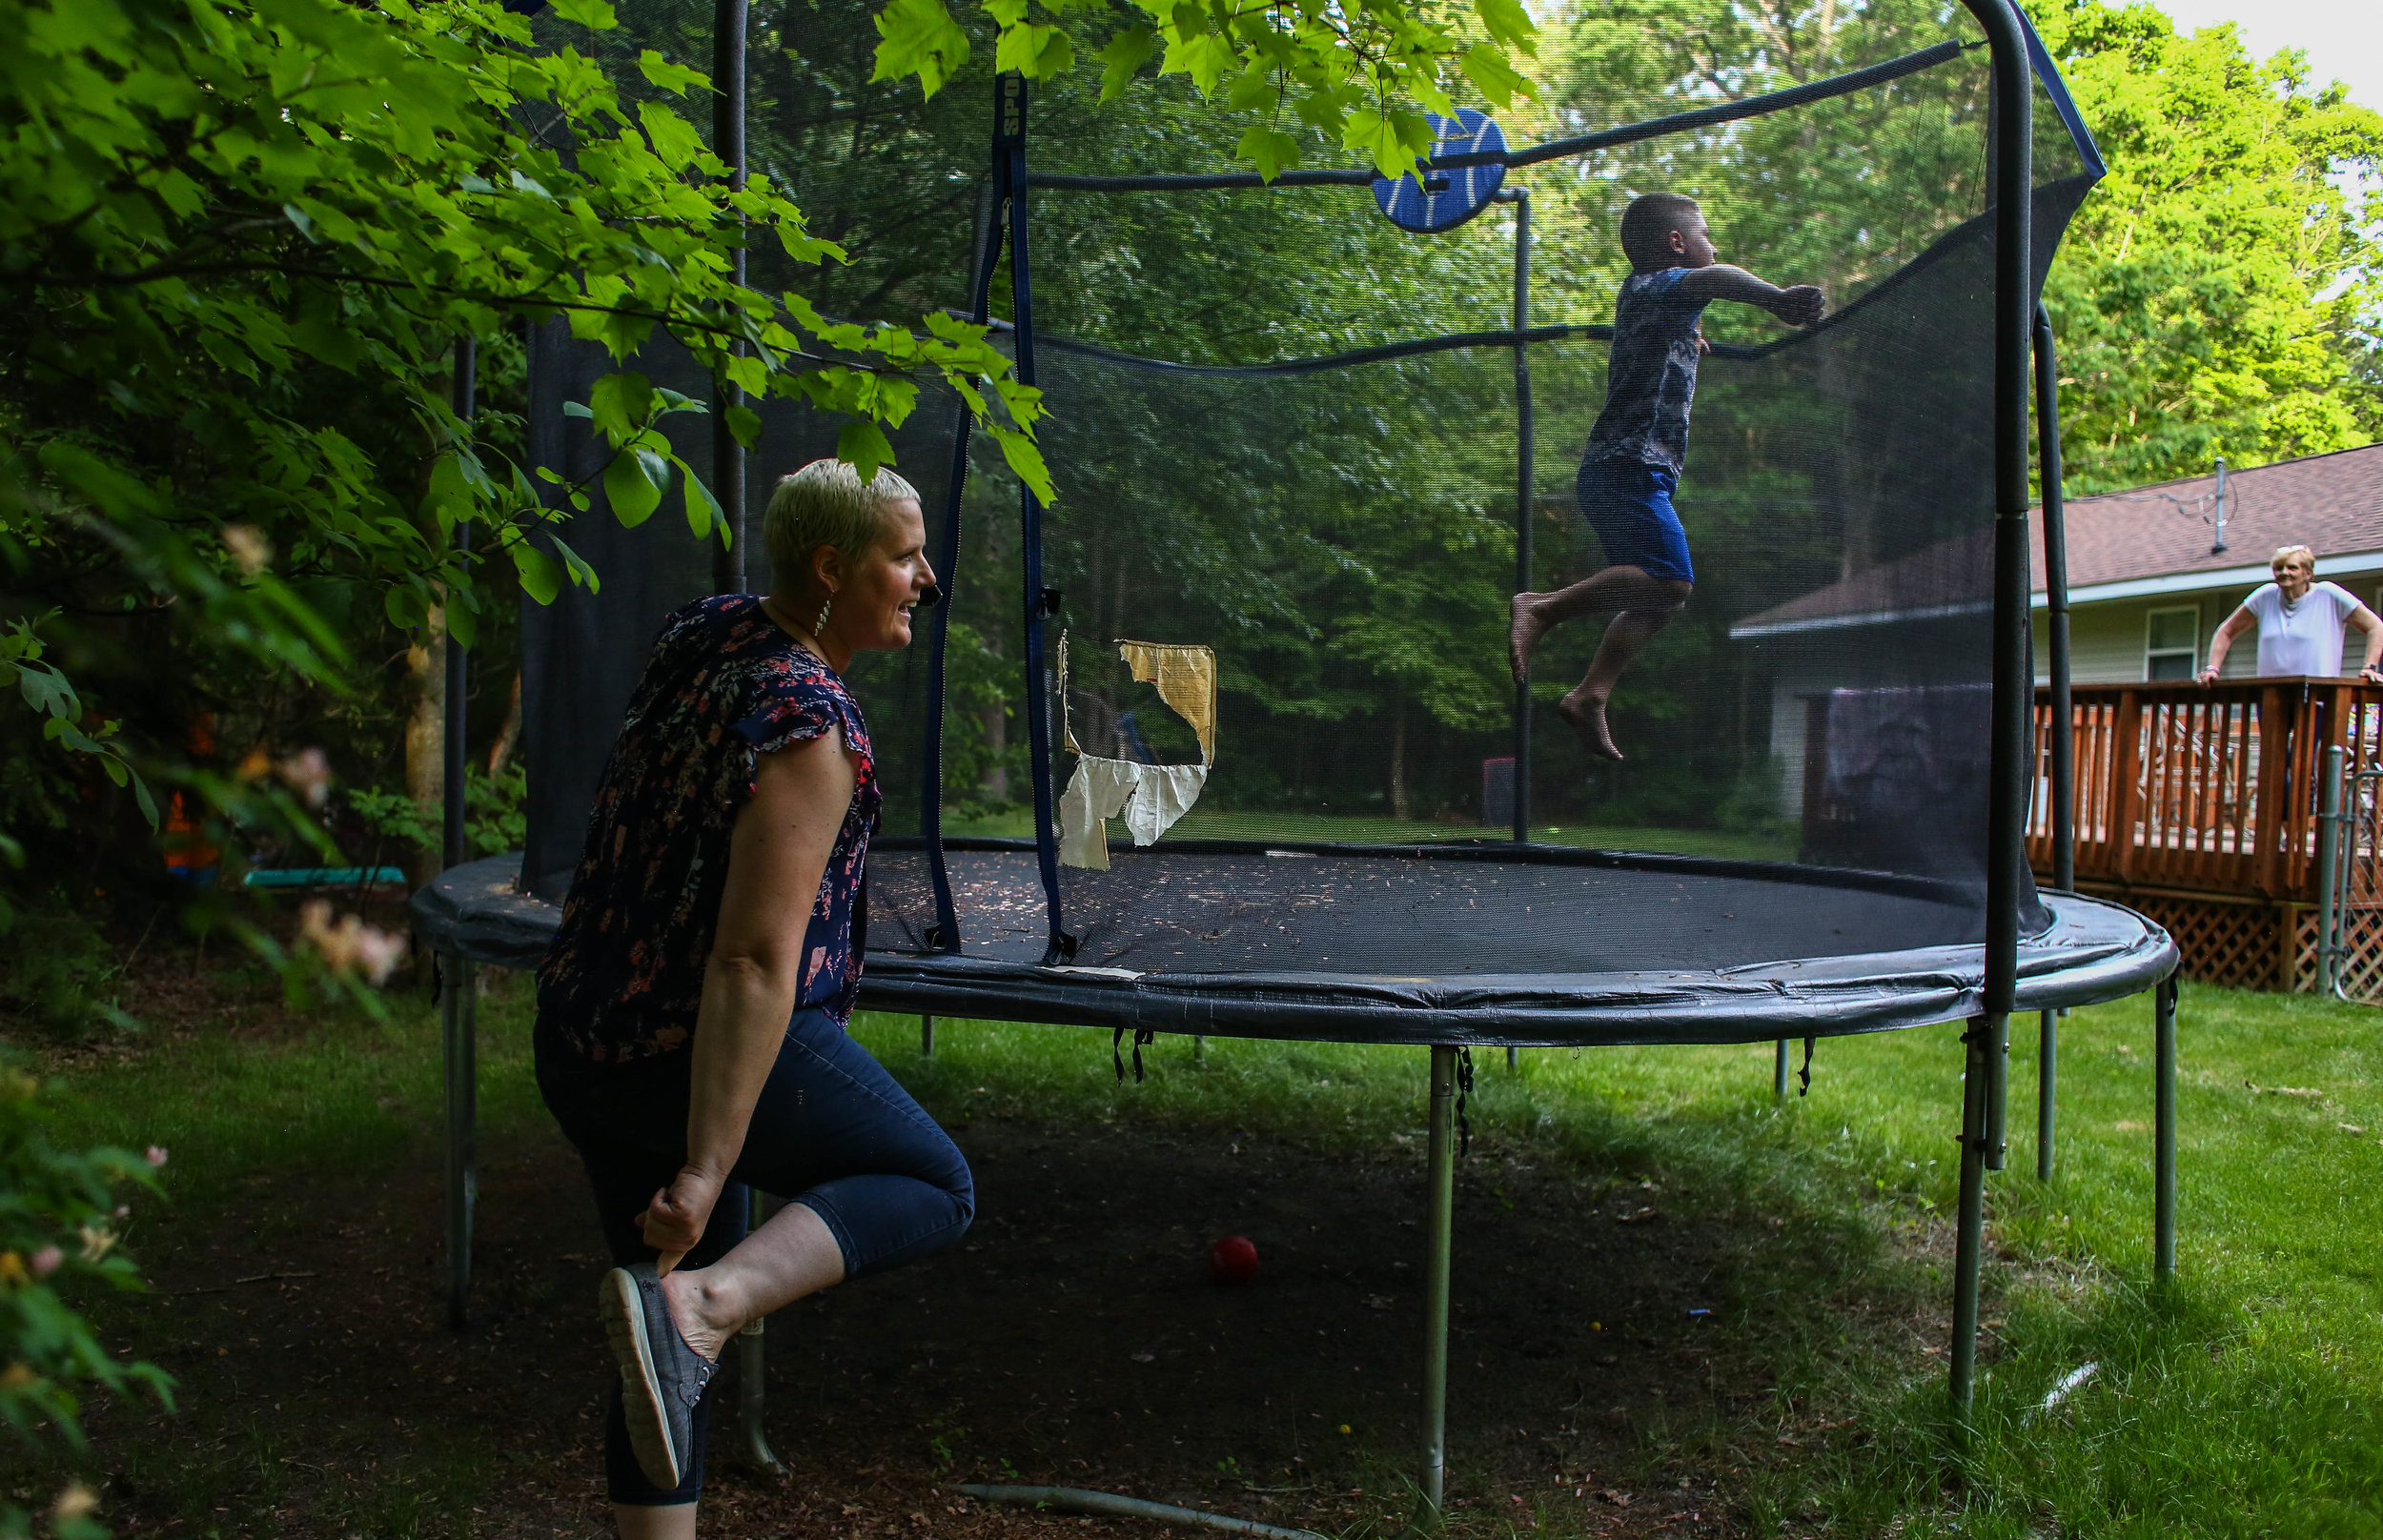  Amanda Cihak puts back on her shoes after jumping on the trampoline with her son Cameron while her mother Janet watches from the back porch at their house, in Muskegon, Michigan on Saturday, June 8, 2019. 